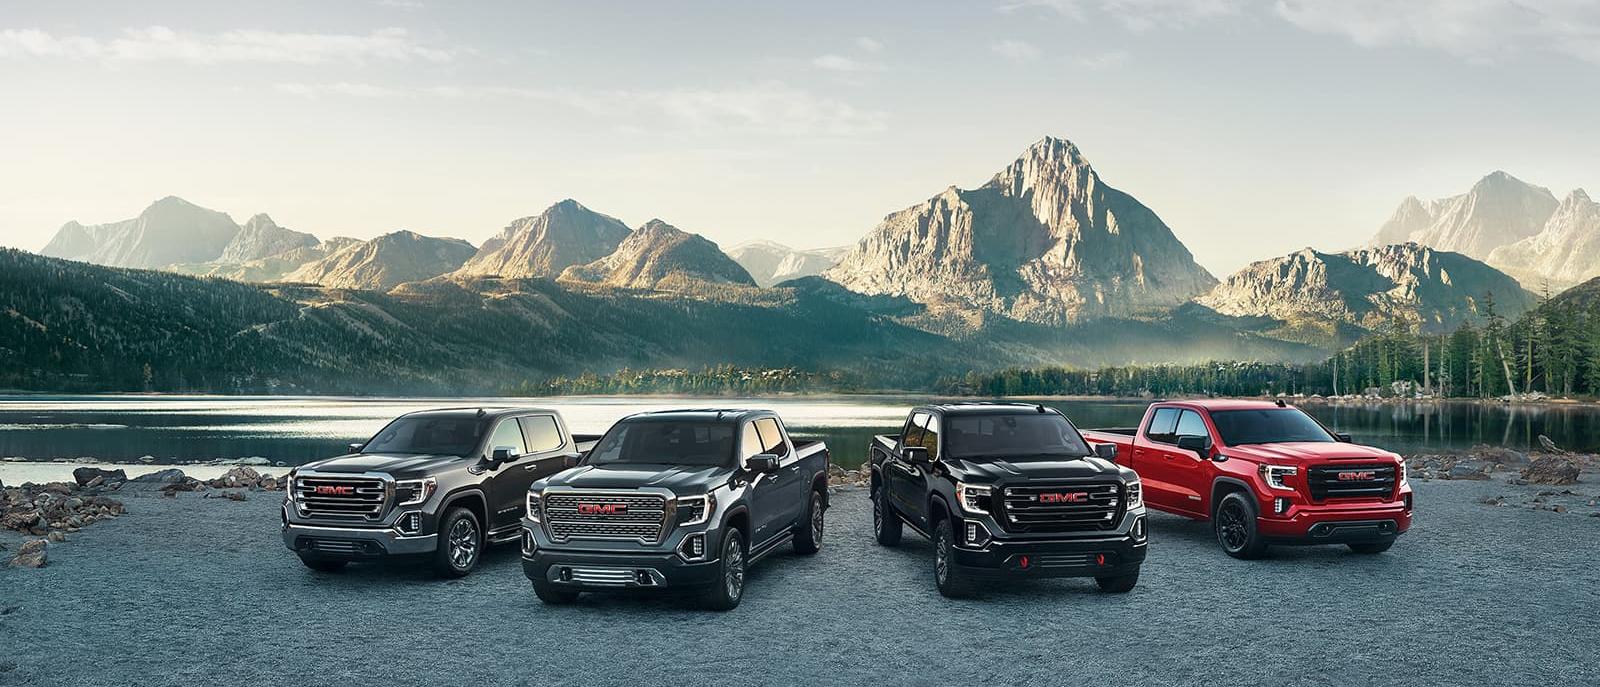 2018 GMC Sierra 1500 packshot in front of mountains and a lake